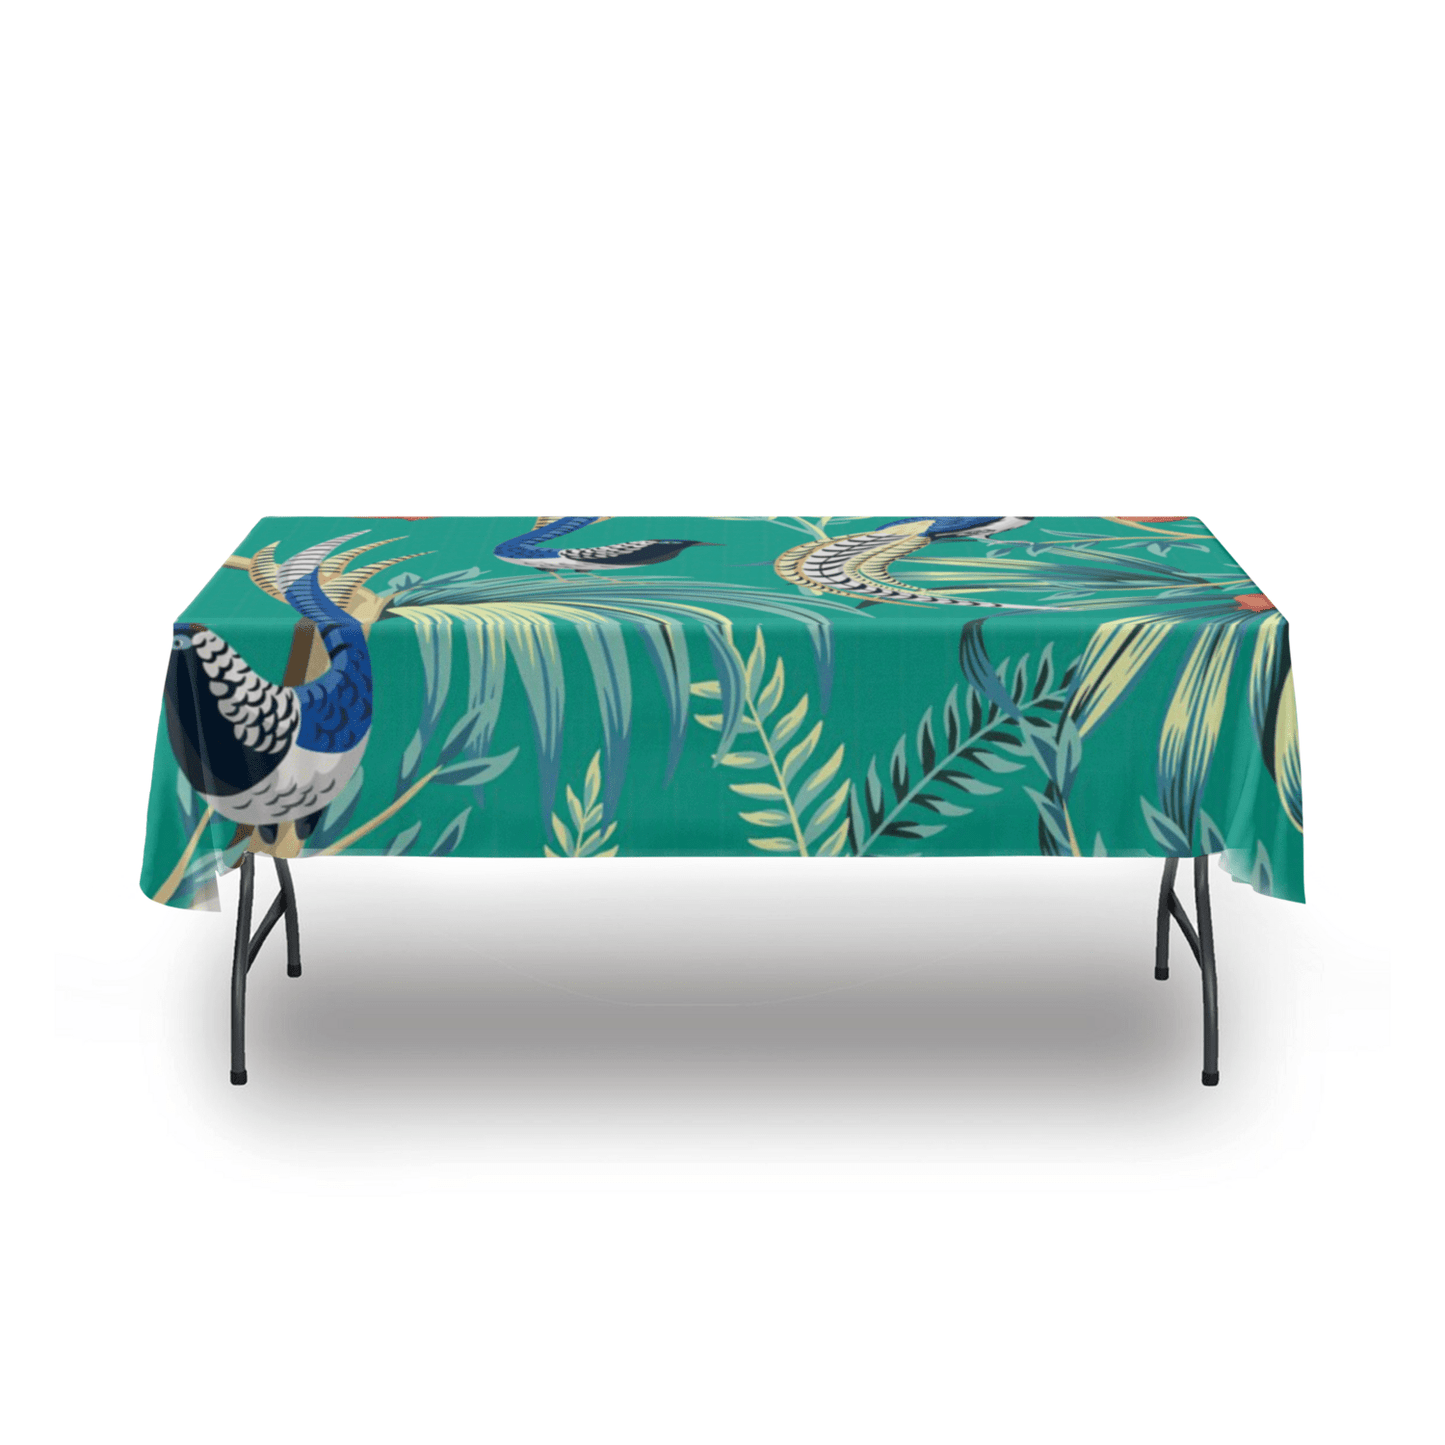 kate-mcenroe-nyc Chinoiserie Green Peacock Tablecloth Tablecloths 54" x 54" 100247